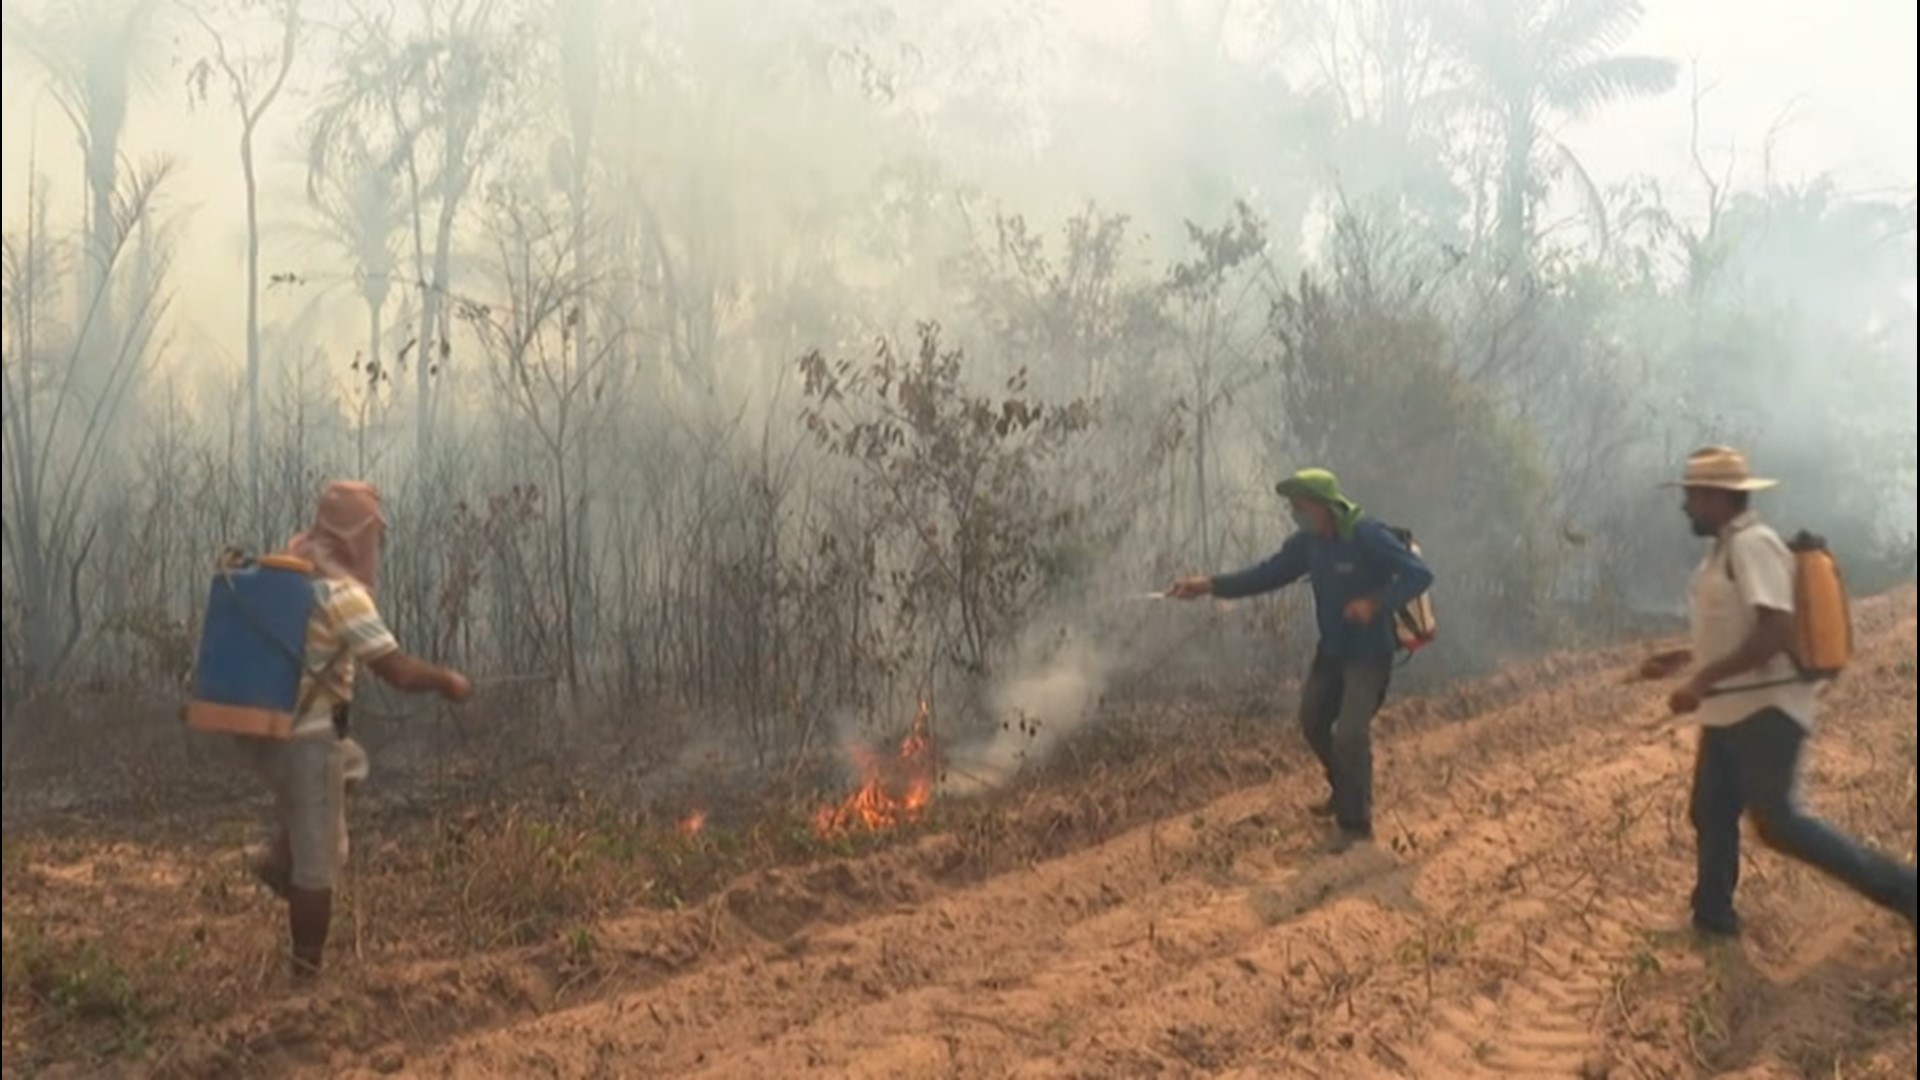 Locals in Sinop, Brazil, raced to battle a wildfire raging in the Amazon rainforest on Aug. 10. Wildfires are up in the region this summer, causing concern.